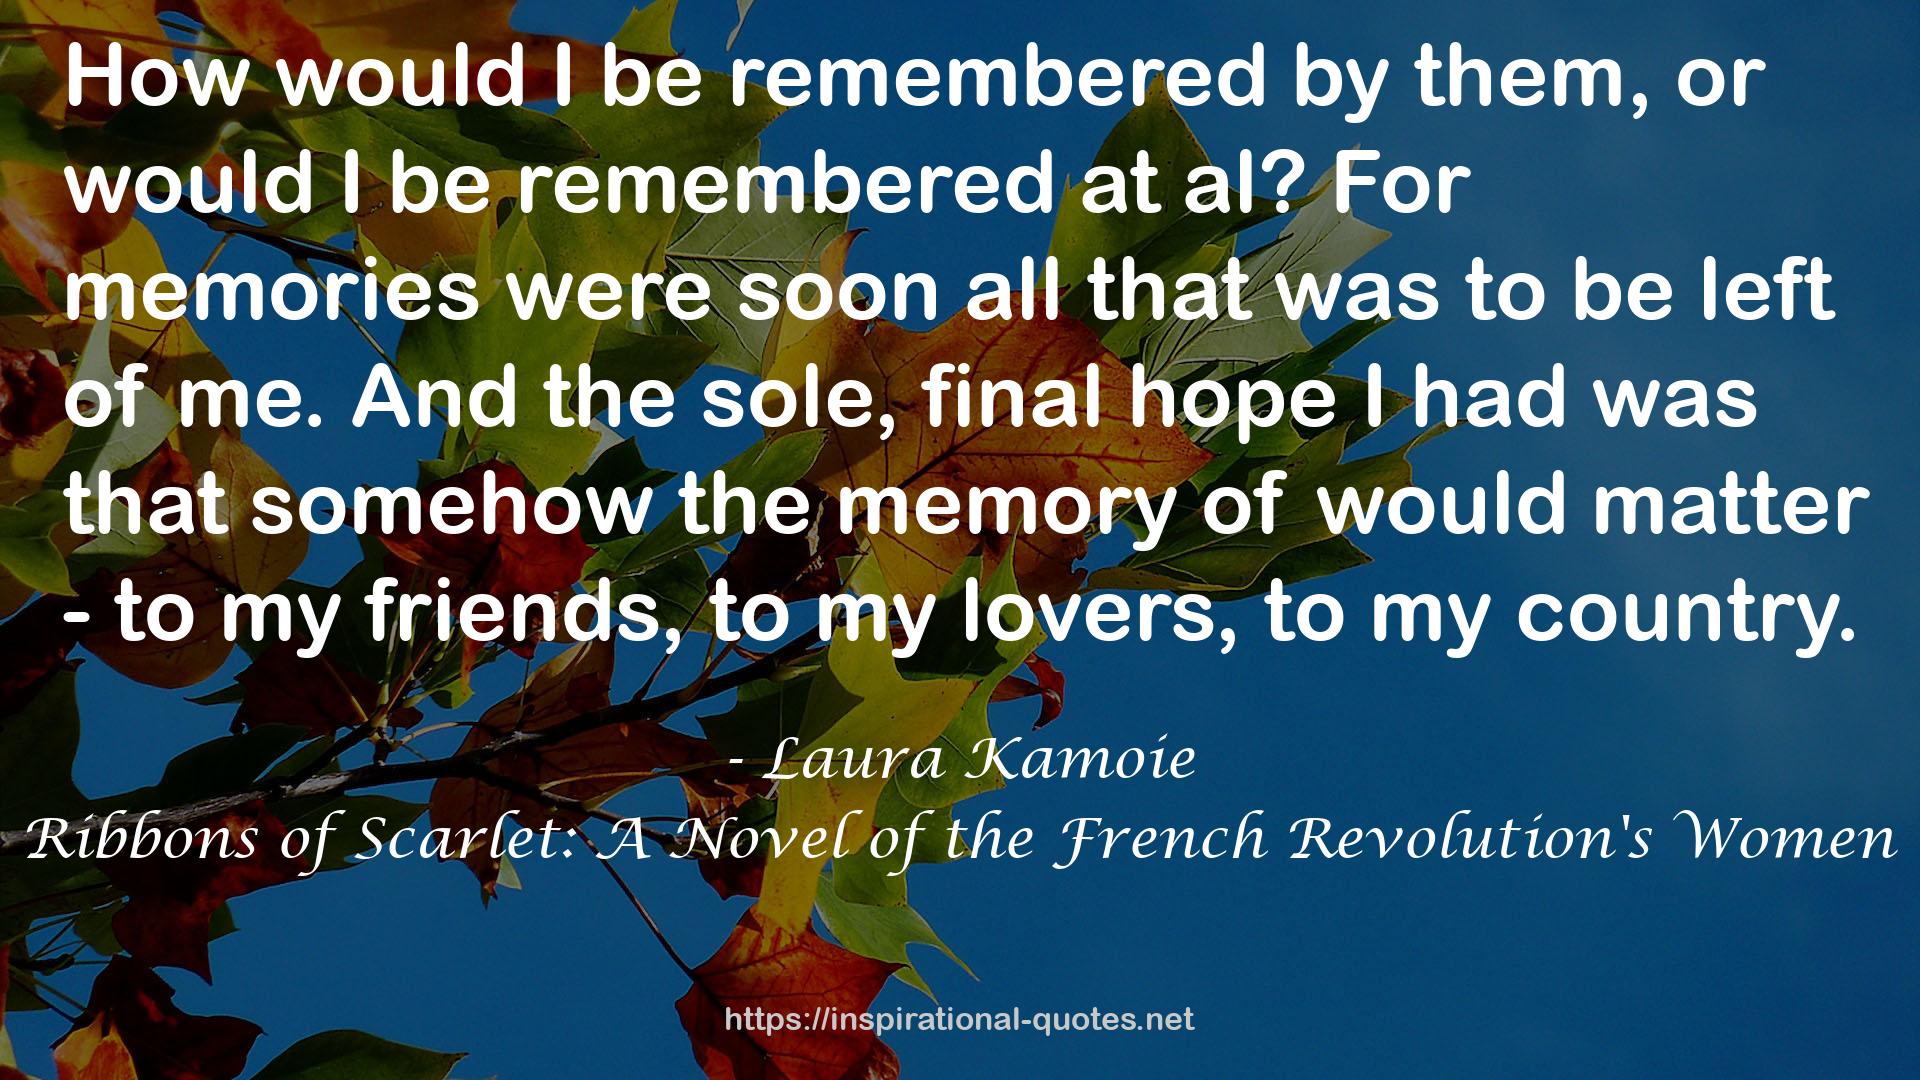 Ribbons of Scarlet: A Novel of the French Revolution's Women QUOTES